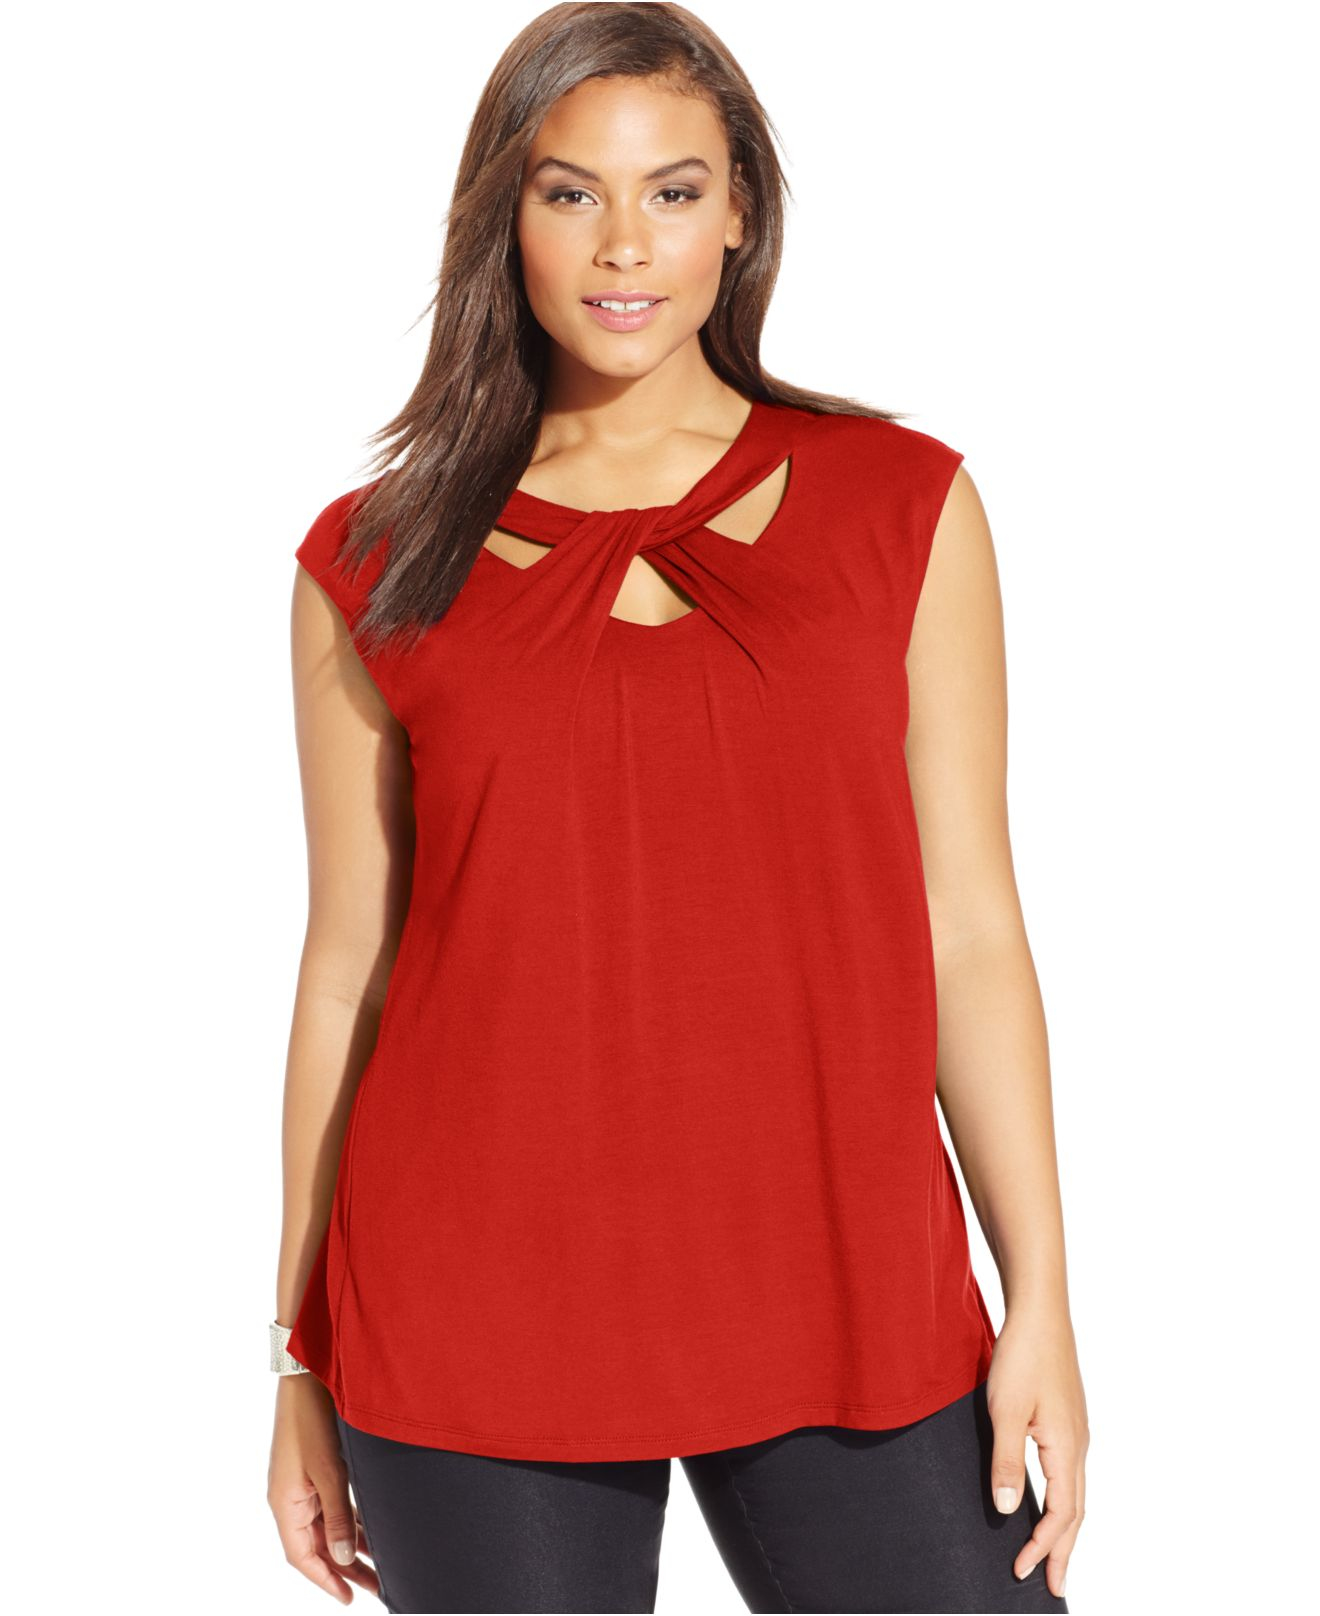 Lyst - Inc International Concepts Plus Size Cap-sleeve Cutout Top in Red